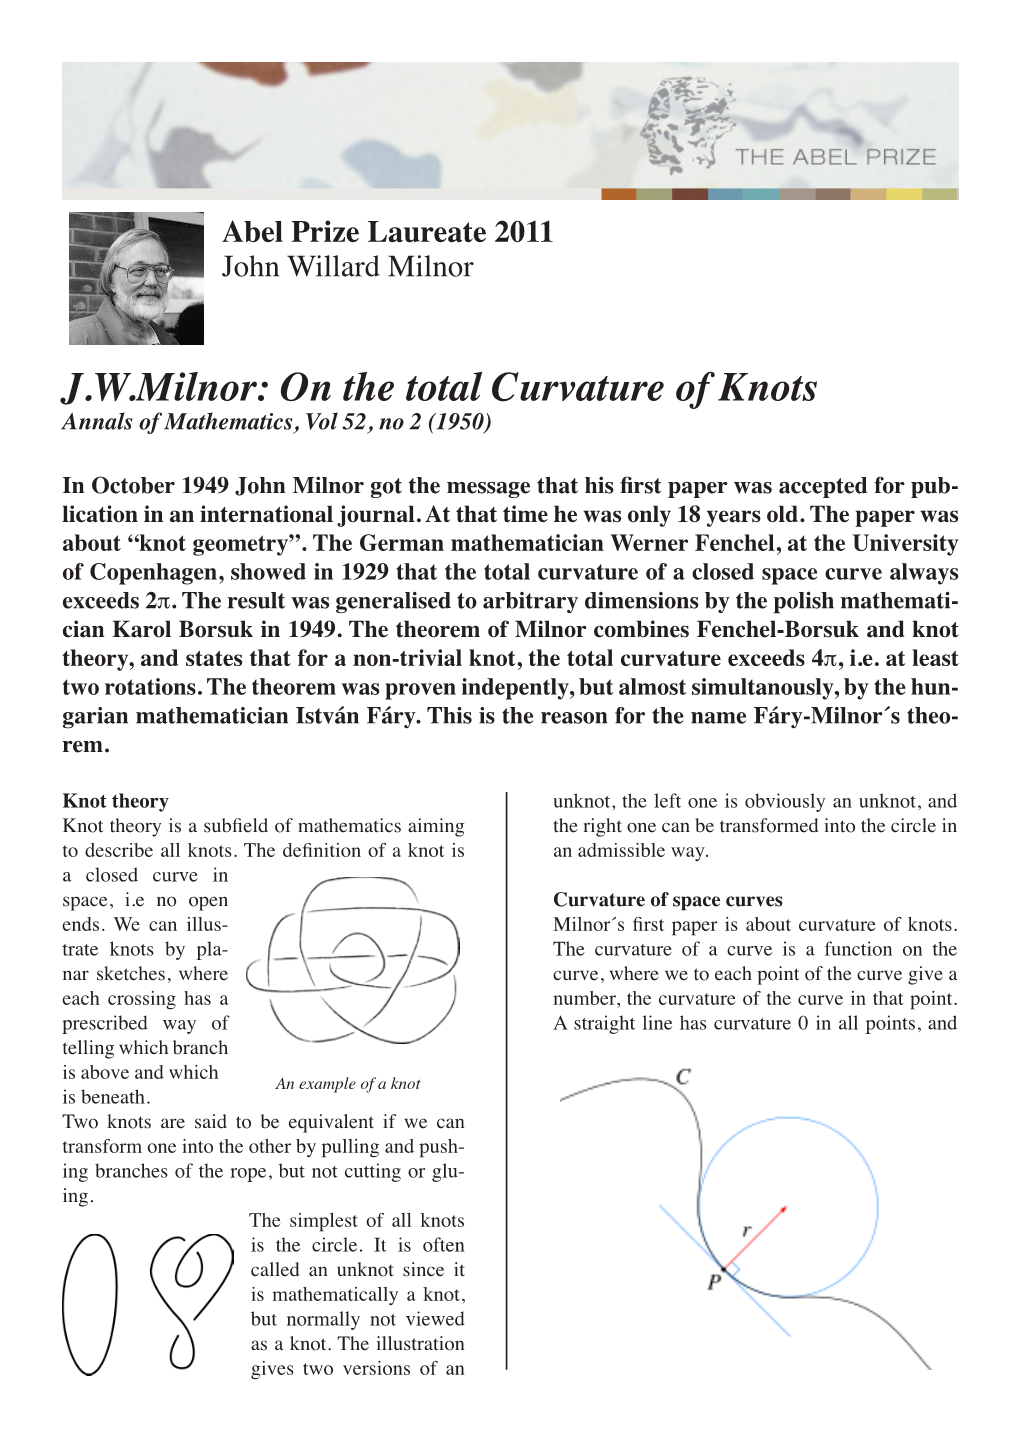 J.W. Milnor: on the Total Curvature of Knots